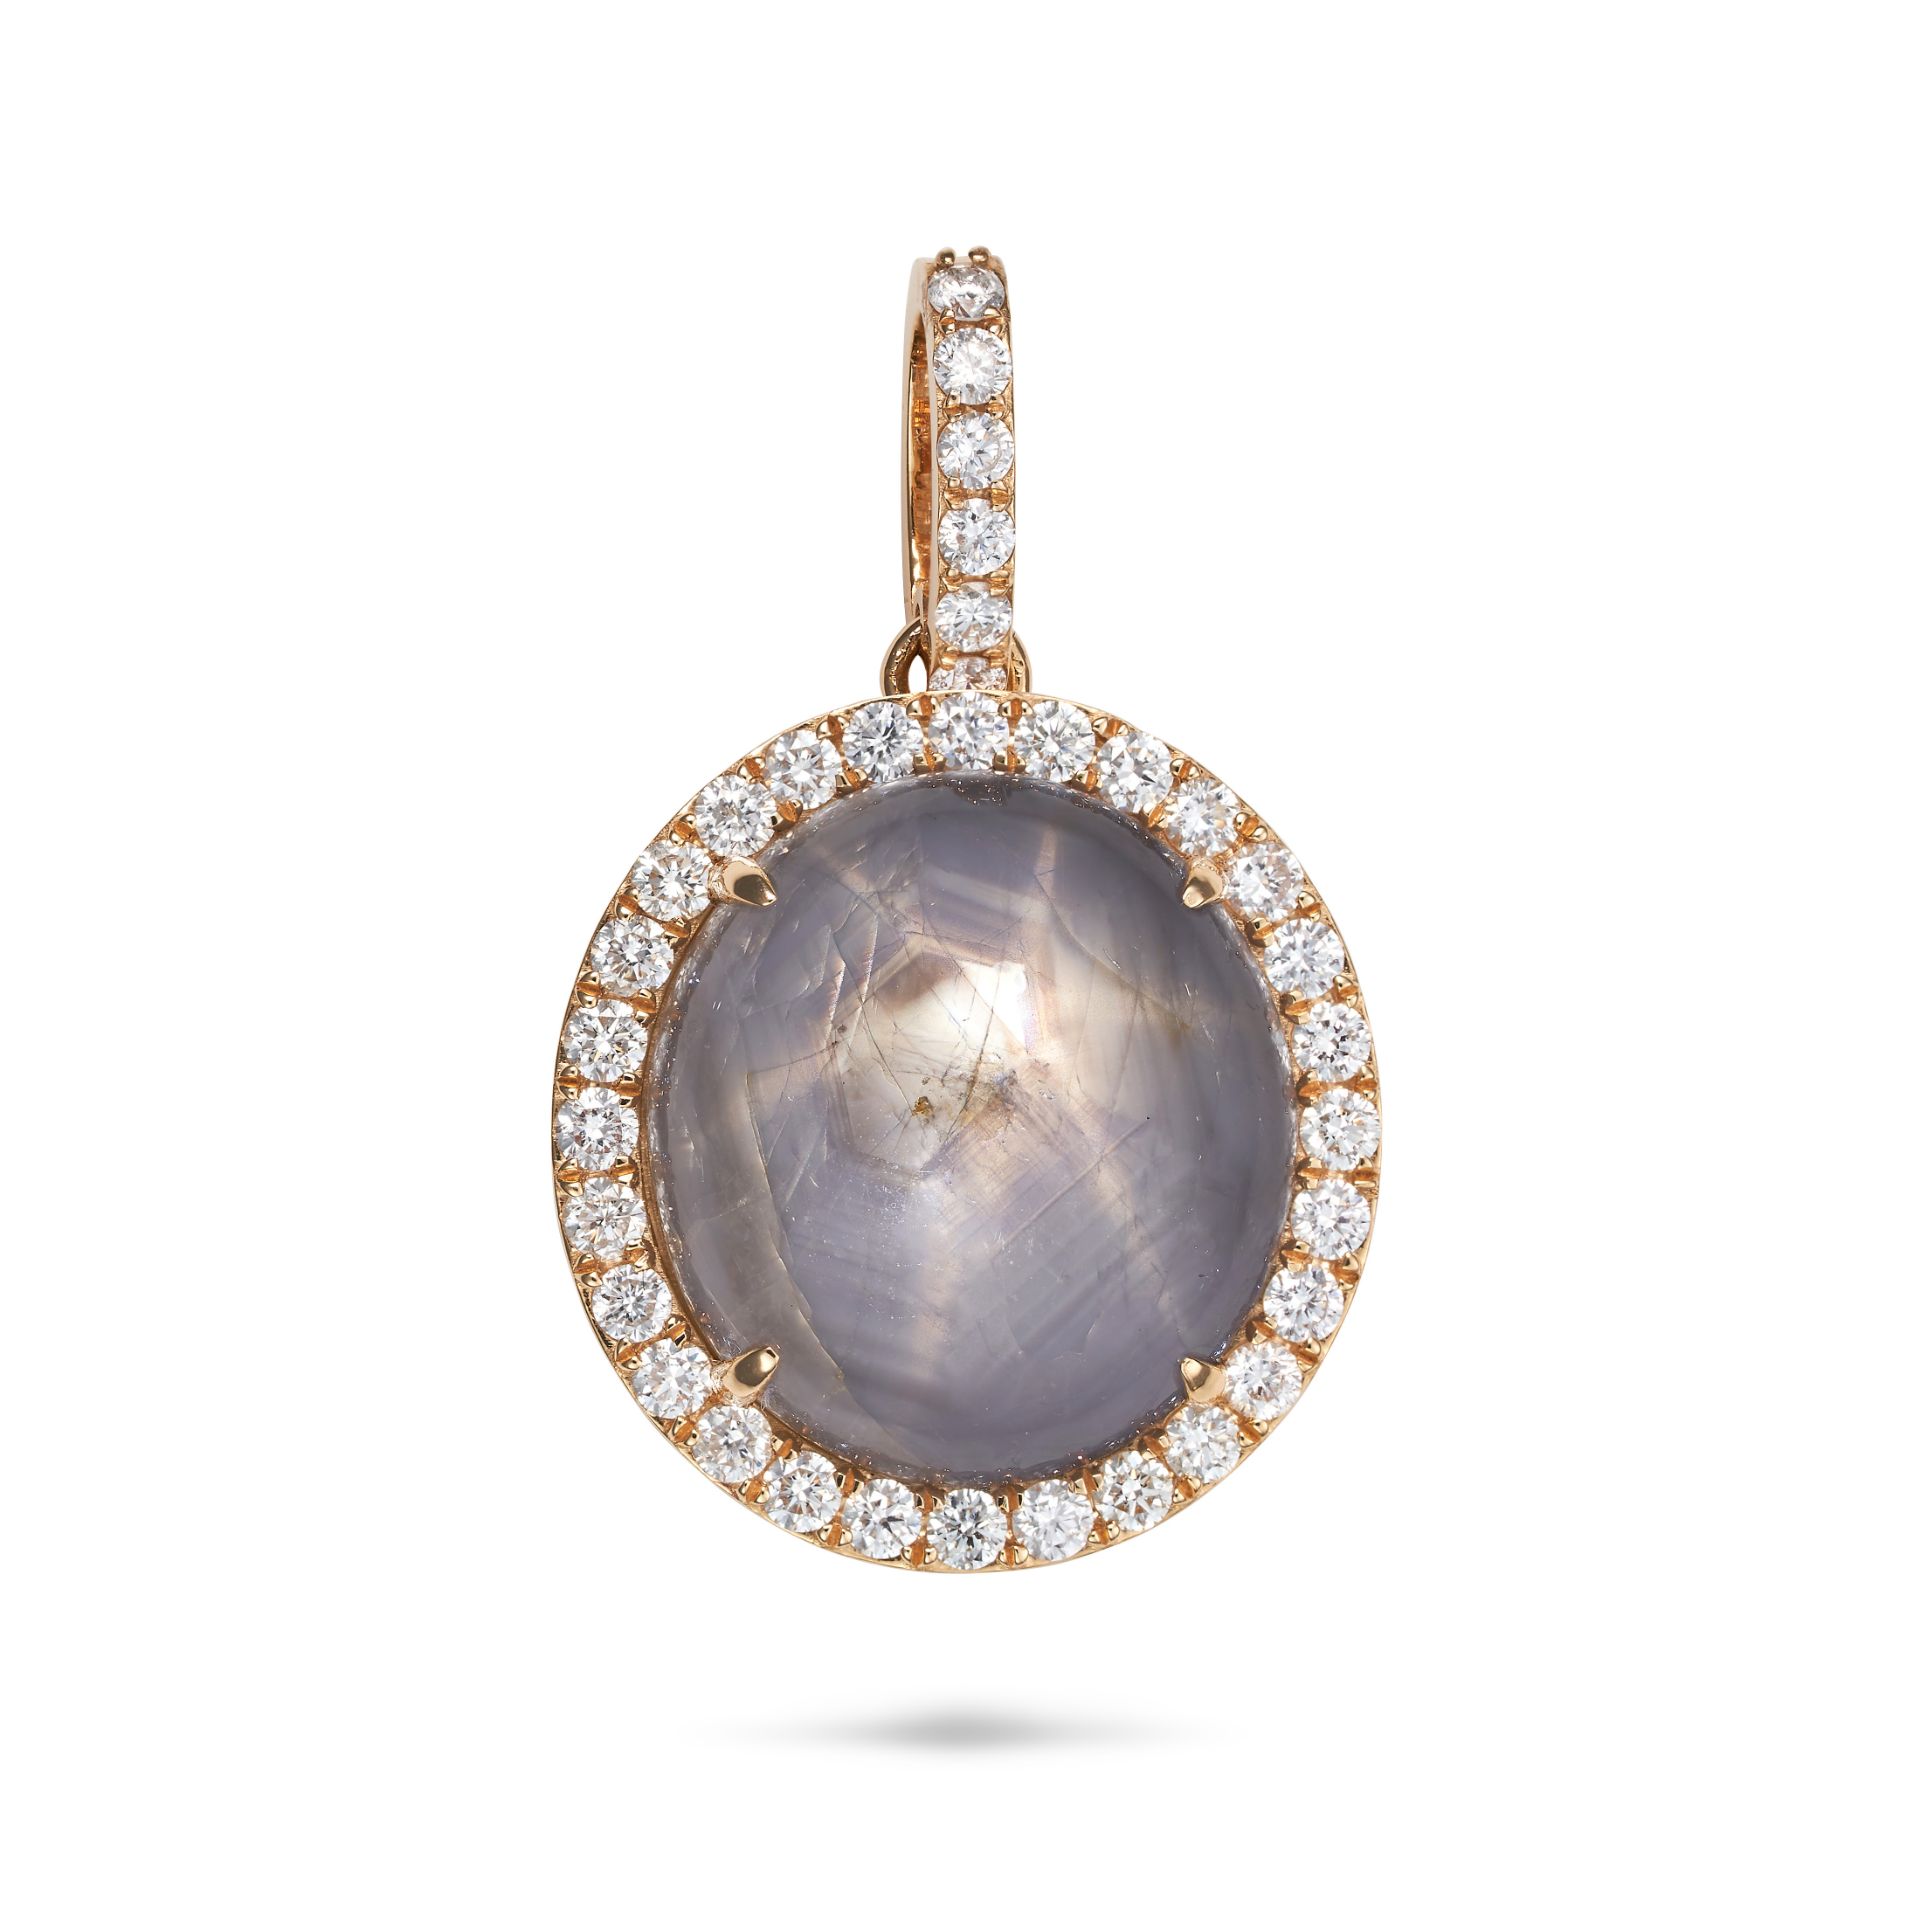 A STAR SAPPHIRE AND DIAMOND PENDANT set with a round cabochon star sapphire of 39.82 carats in a ...